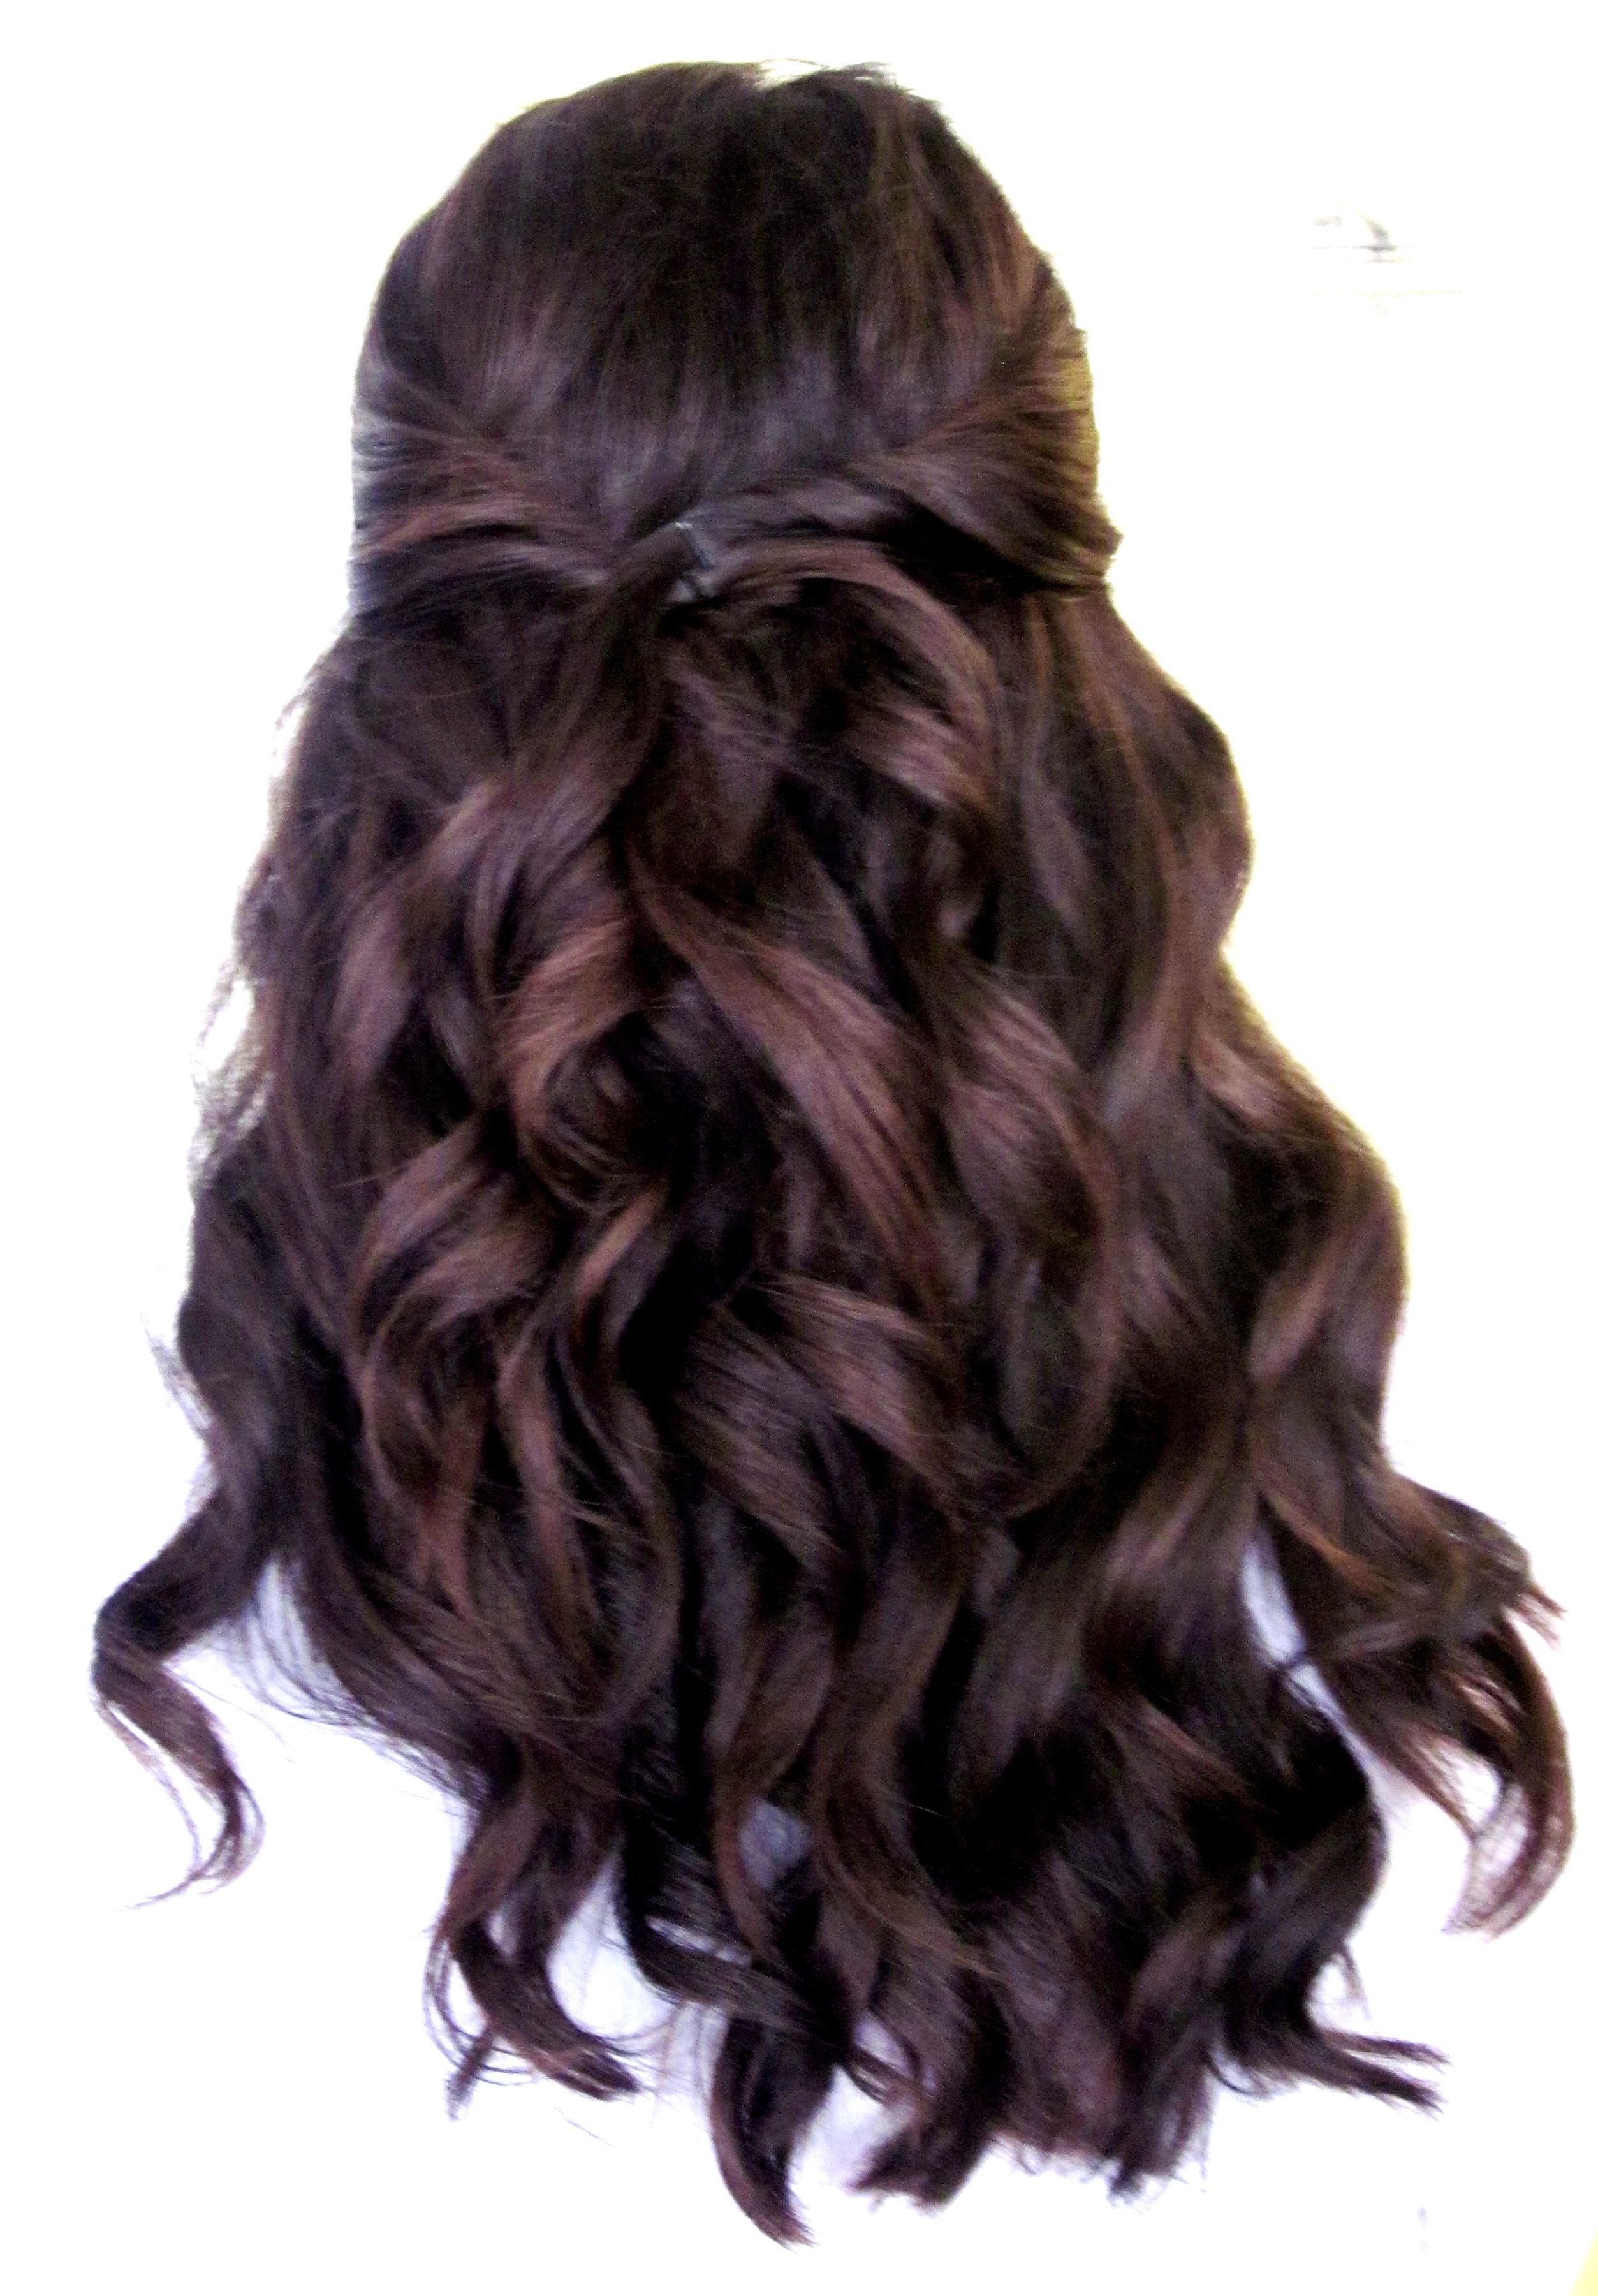 Loose Curls, A Few Pinned Back One Of My Favorite Hair Styleswait In Well Liked Fabulous Cascade Of Loose Curls Bridal Hairstyles (View 8 of 20)